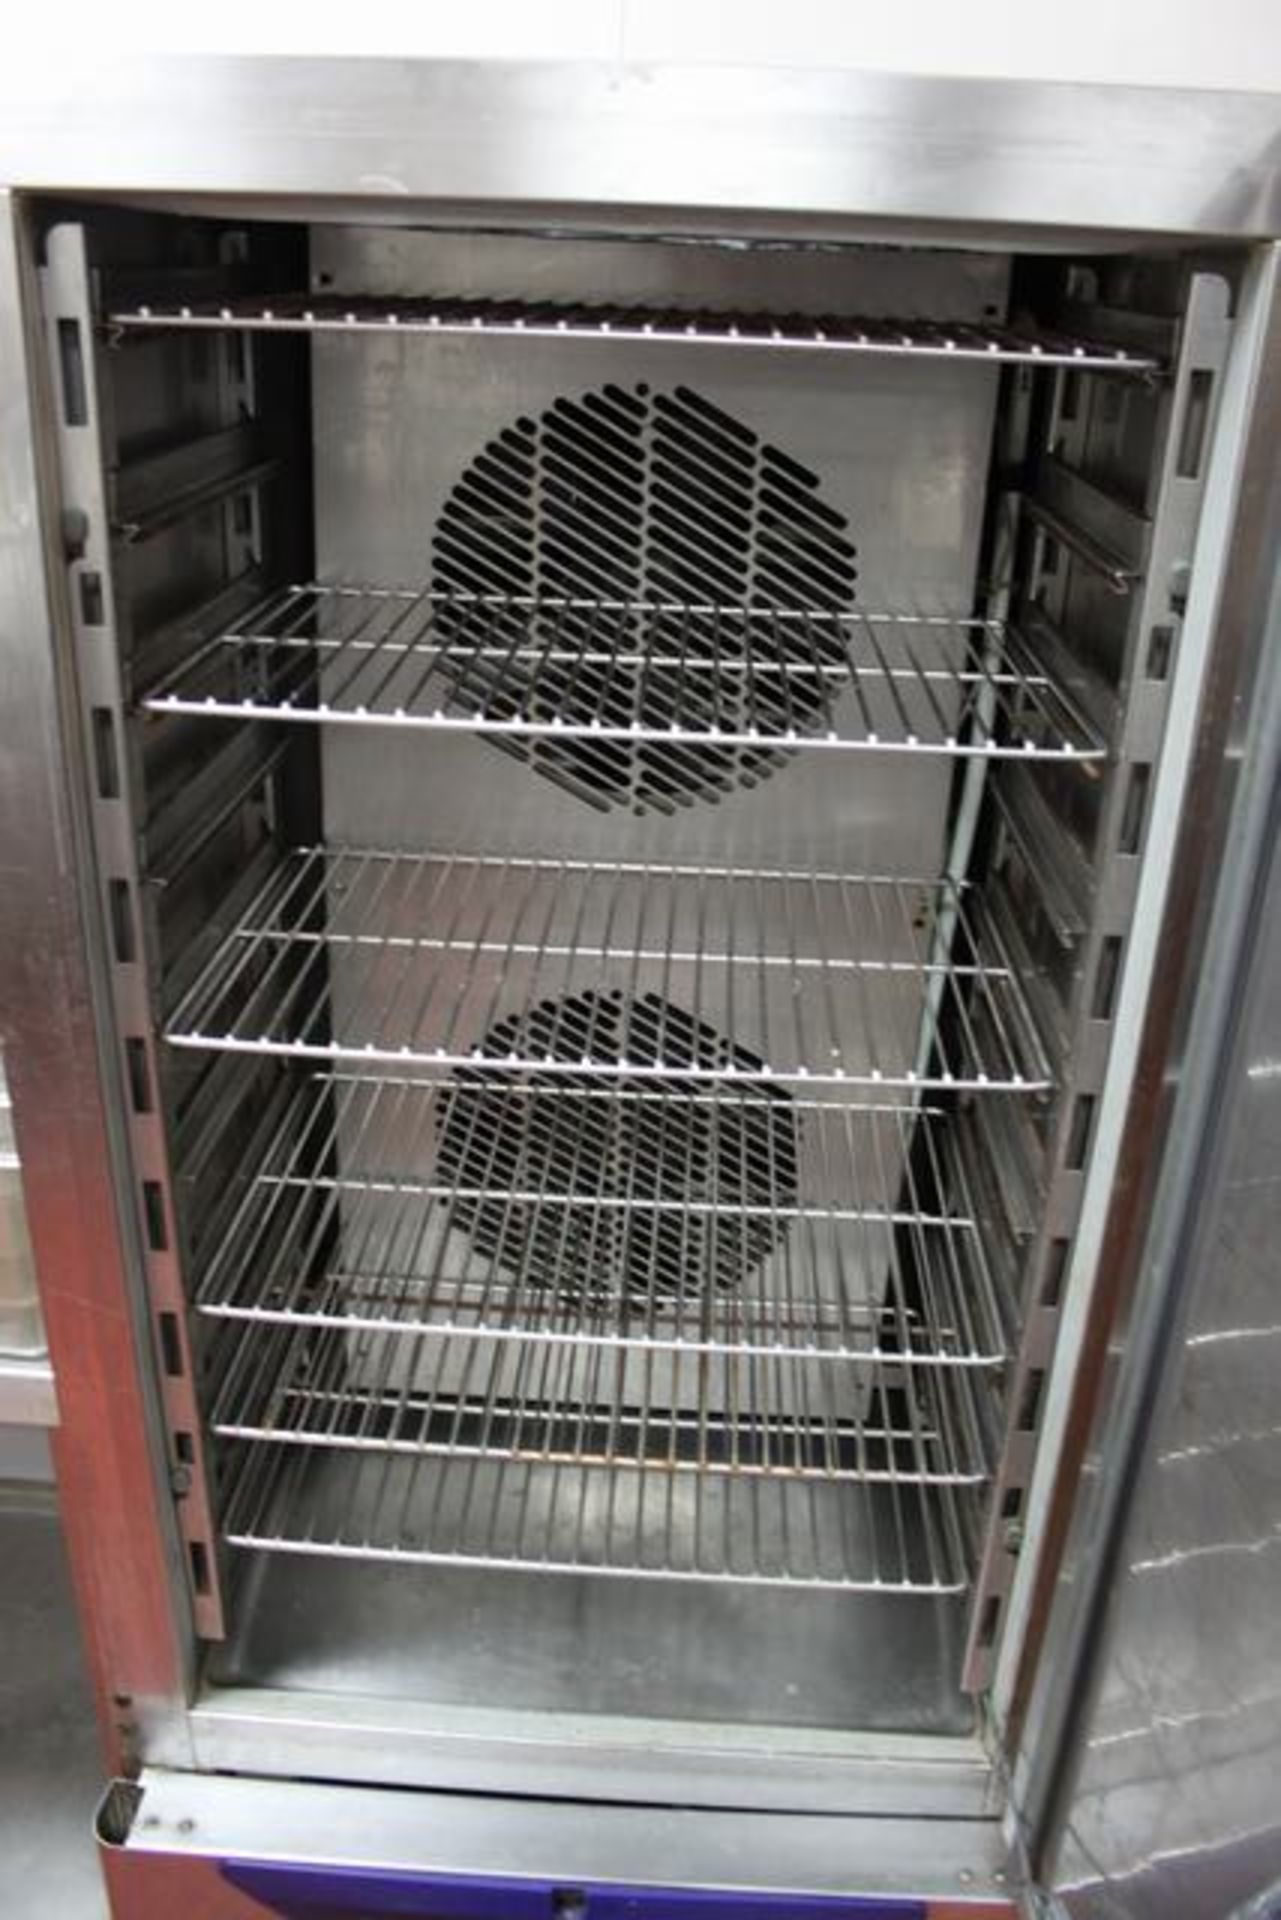 Williams WBCF30 (DM) blast freezer simple 1, 2, 3 operation designed for 43°C ambient environment - Image 2 of 2